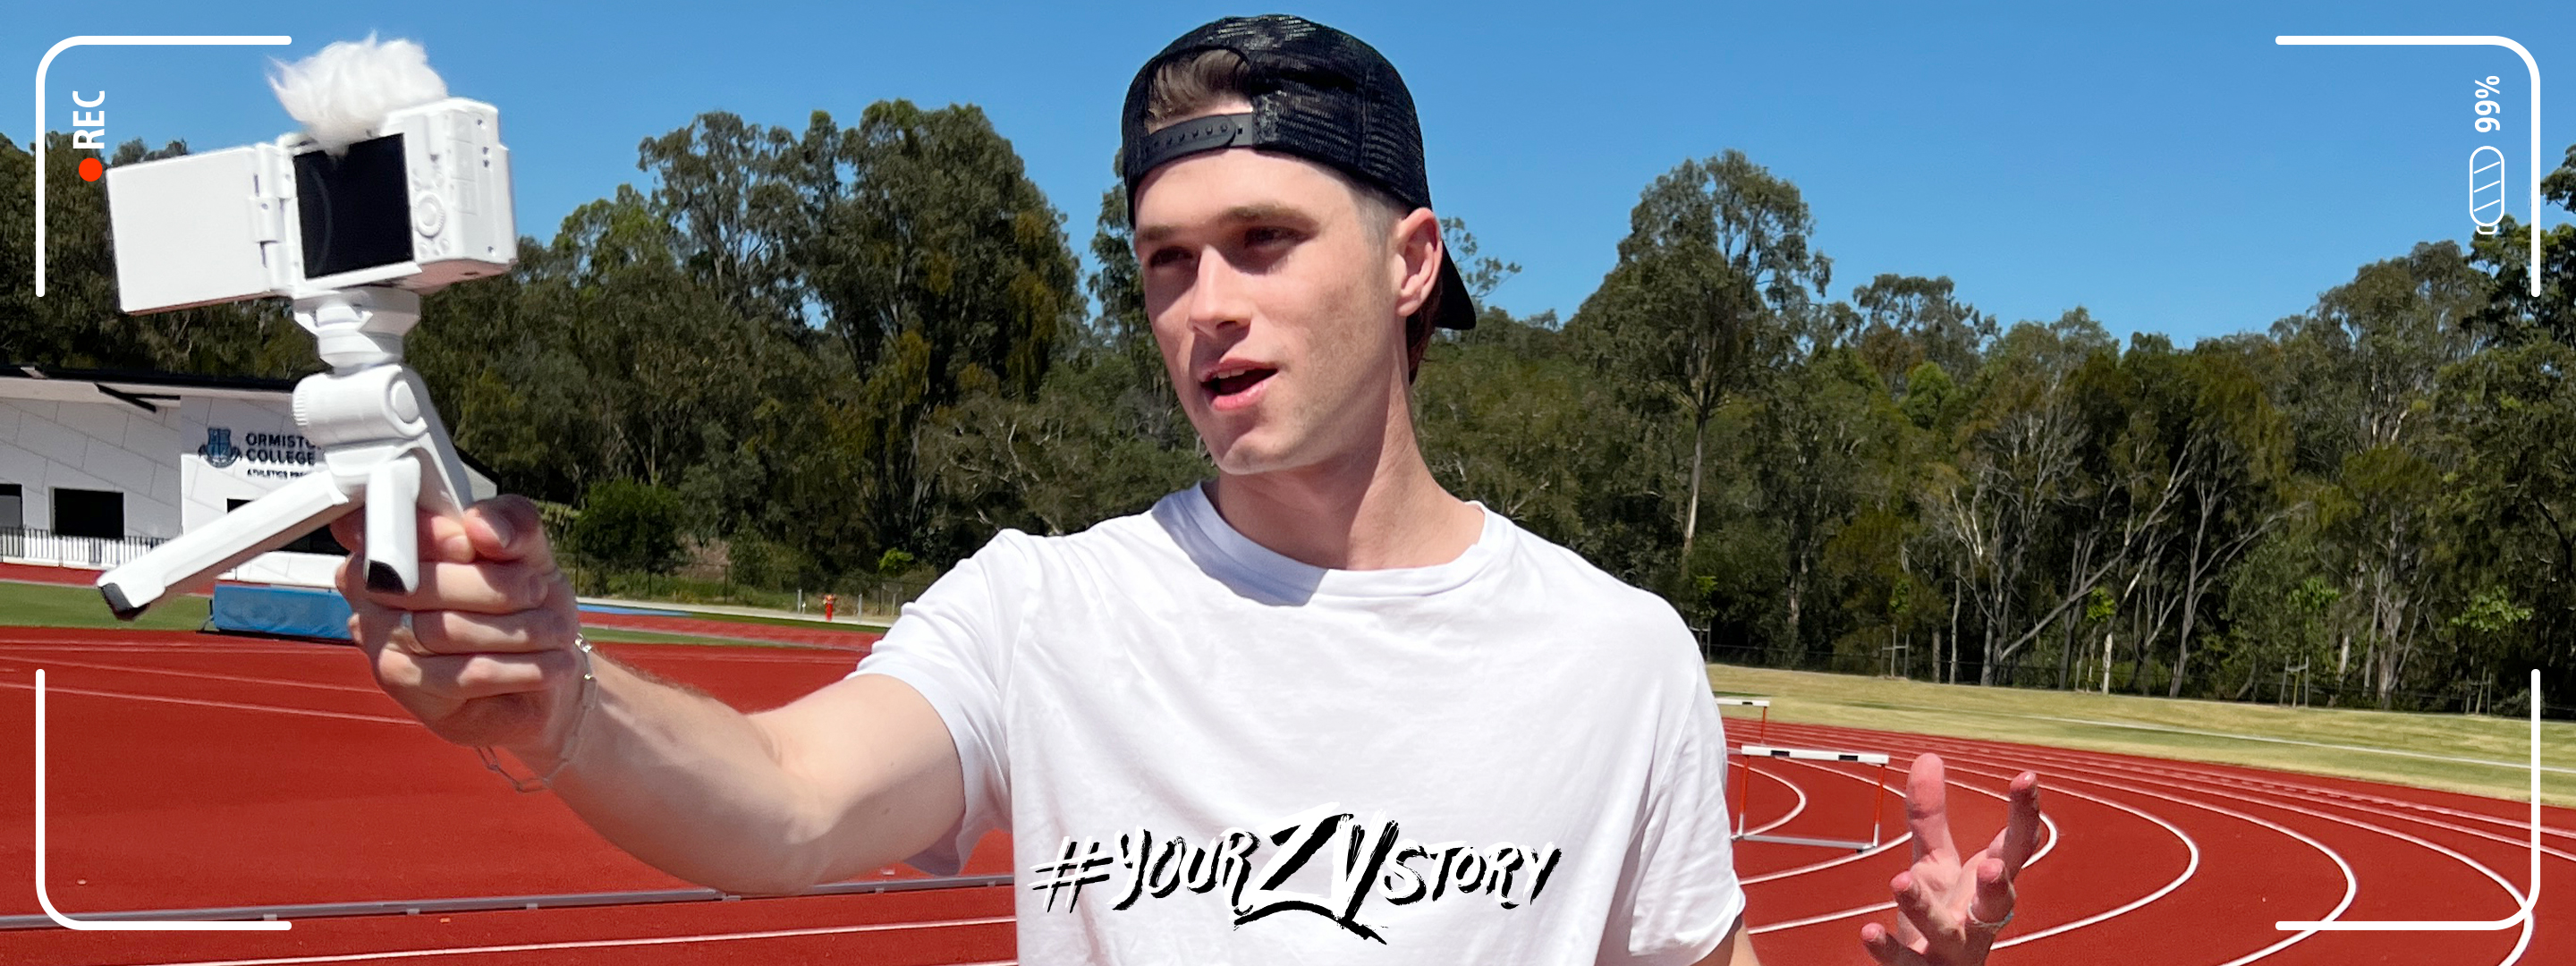 Mackenzie shares his unique world with YourZVStory